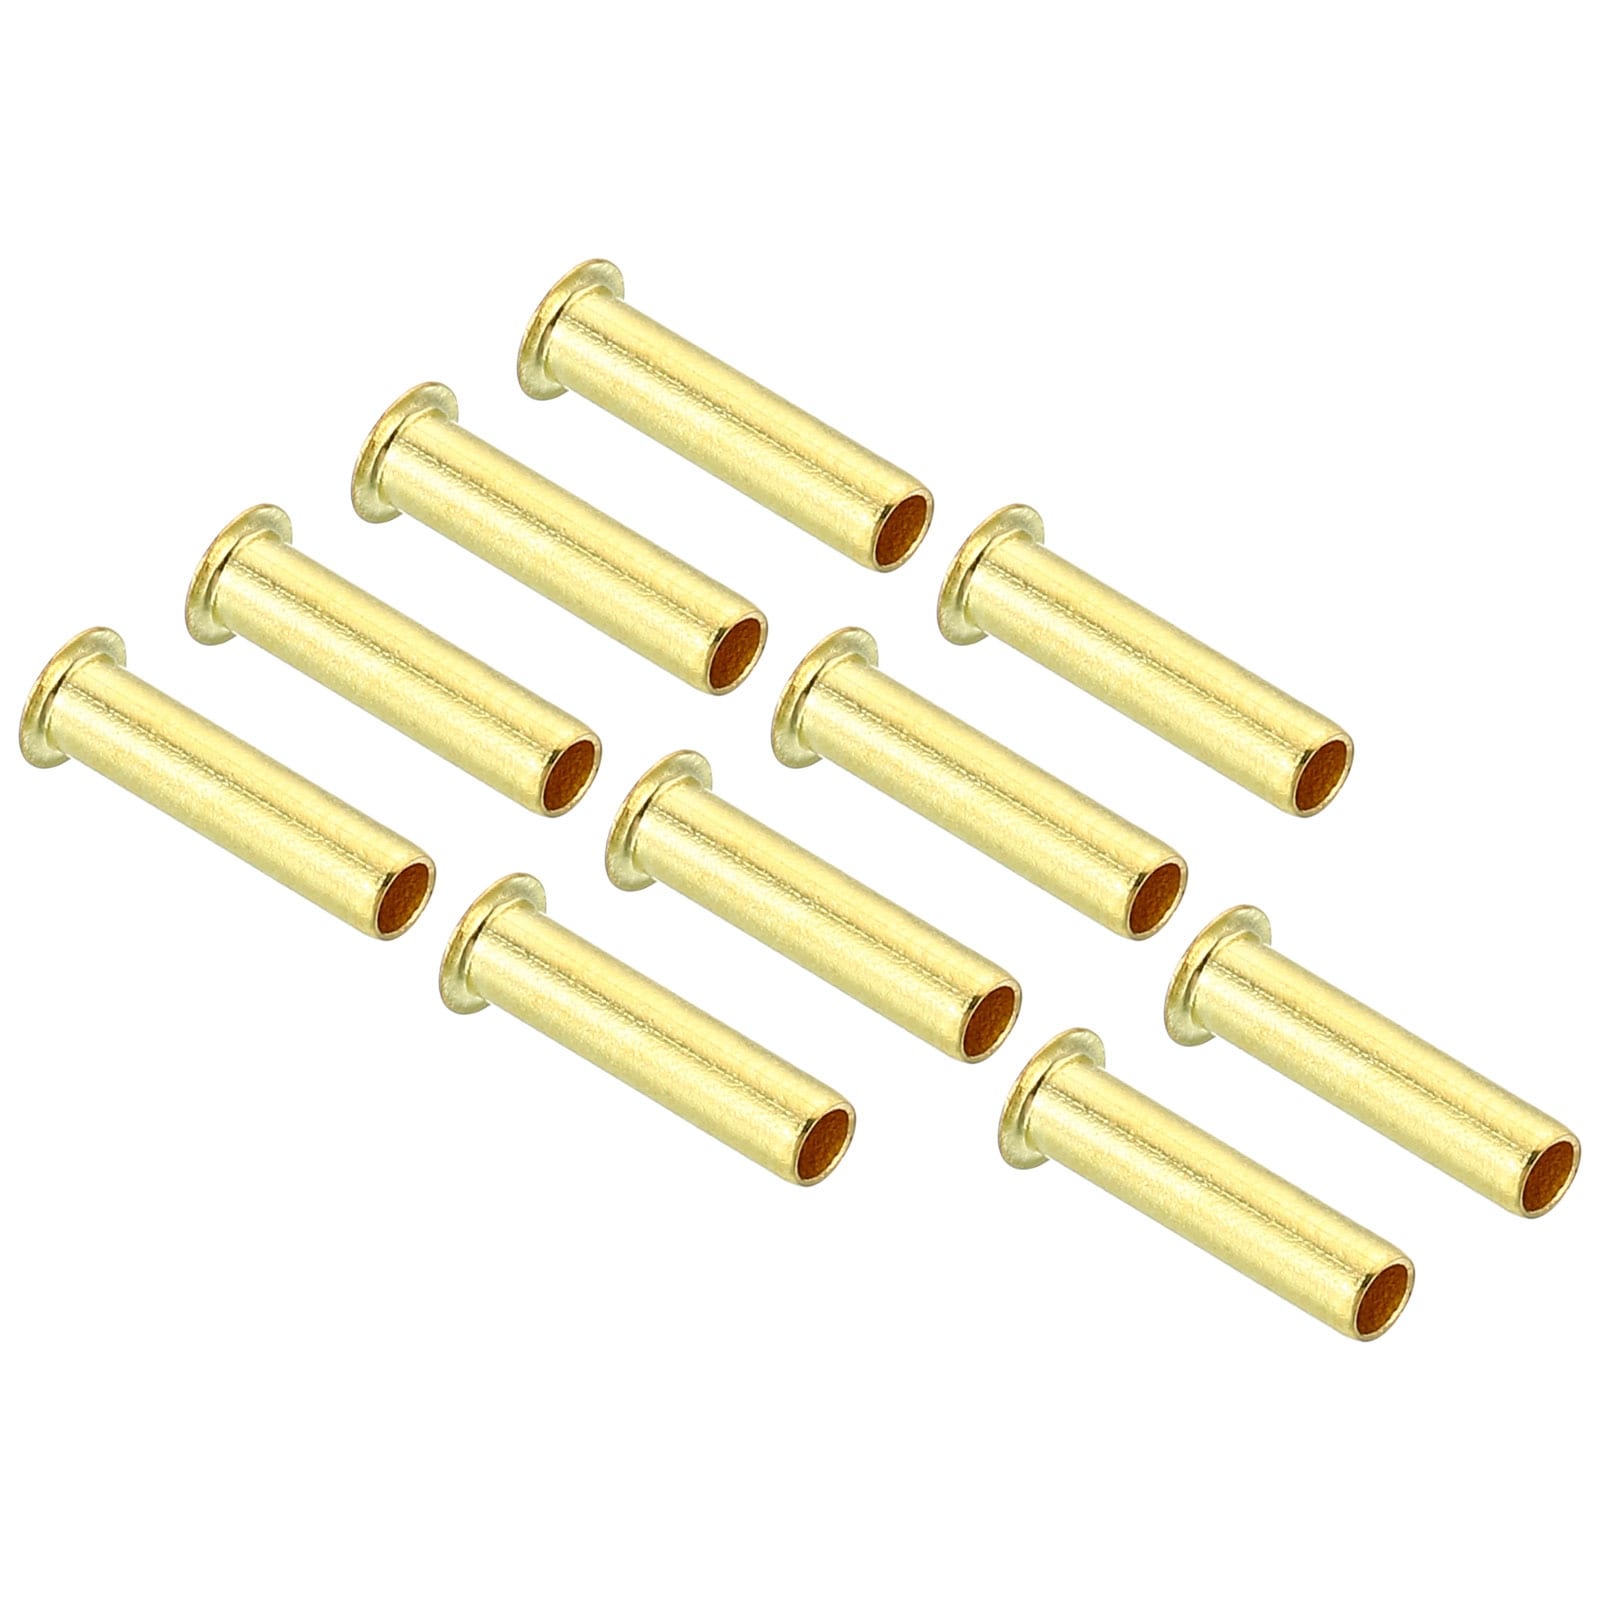 https://ak1.ostkcdn.com/images/products/is/images/direct/84f4f664dee3d4e1d57a3c021681185901075e97/30pcs-Brass-Compression-Sleeves-Insert-Brass-Ferrule-Fitting.jpg